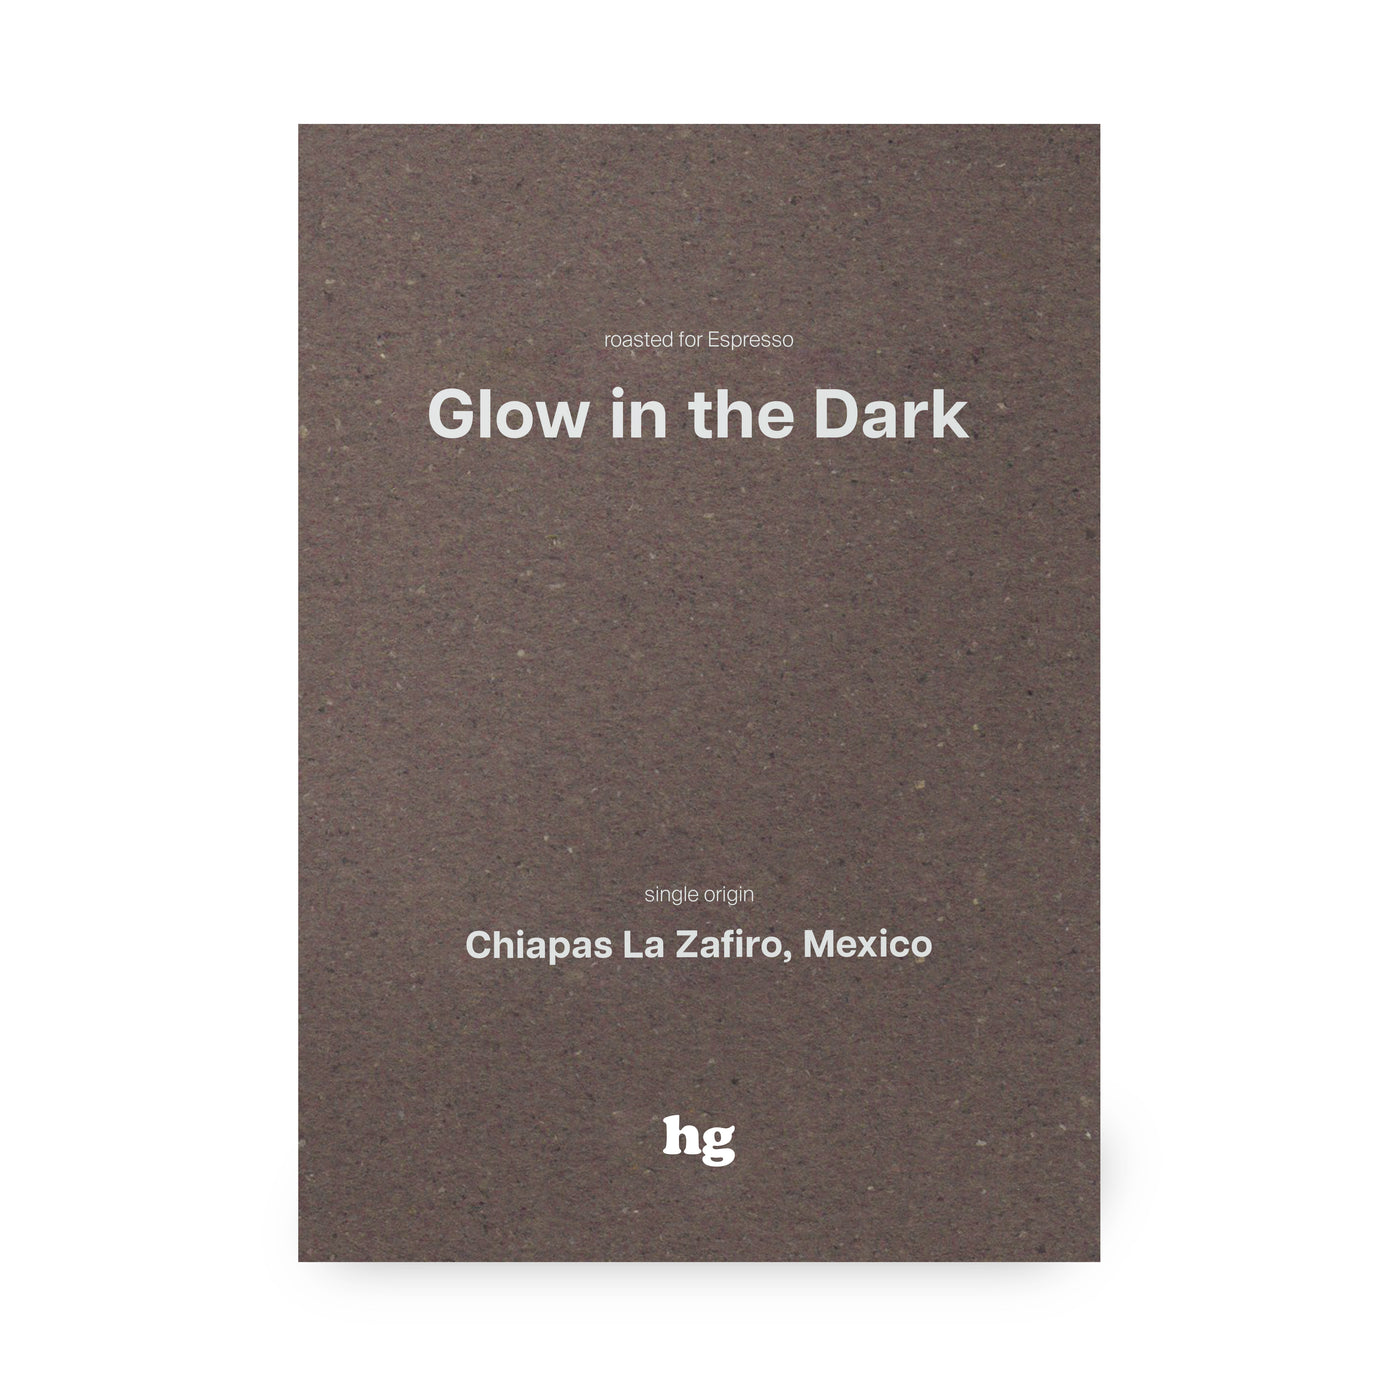 3 Months Prepaid Glow In The Dark Subscription (Get 1 Timemore French Press Free)